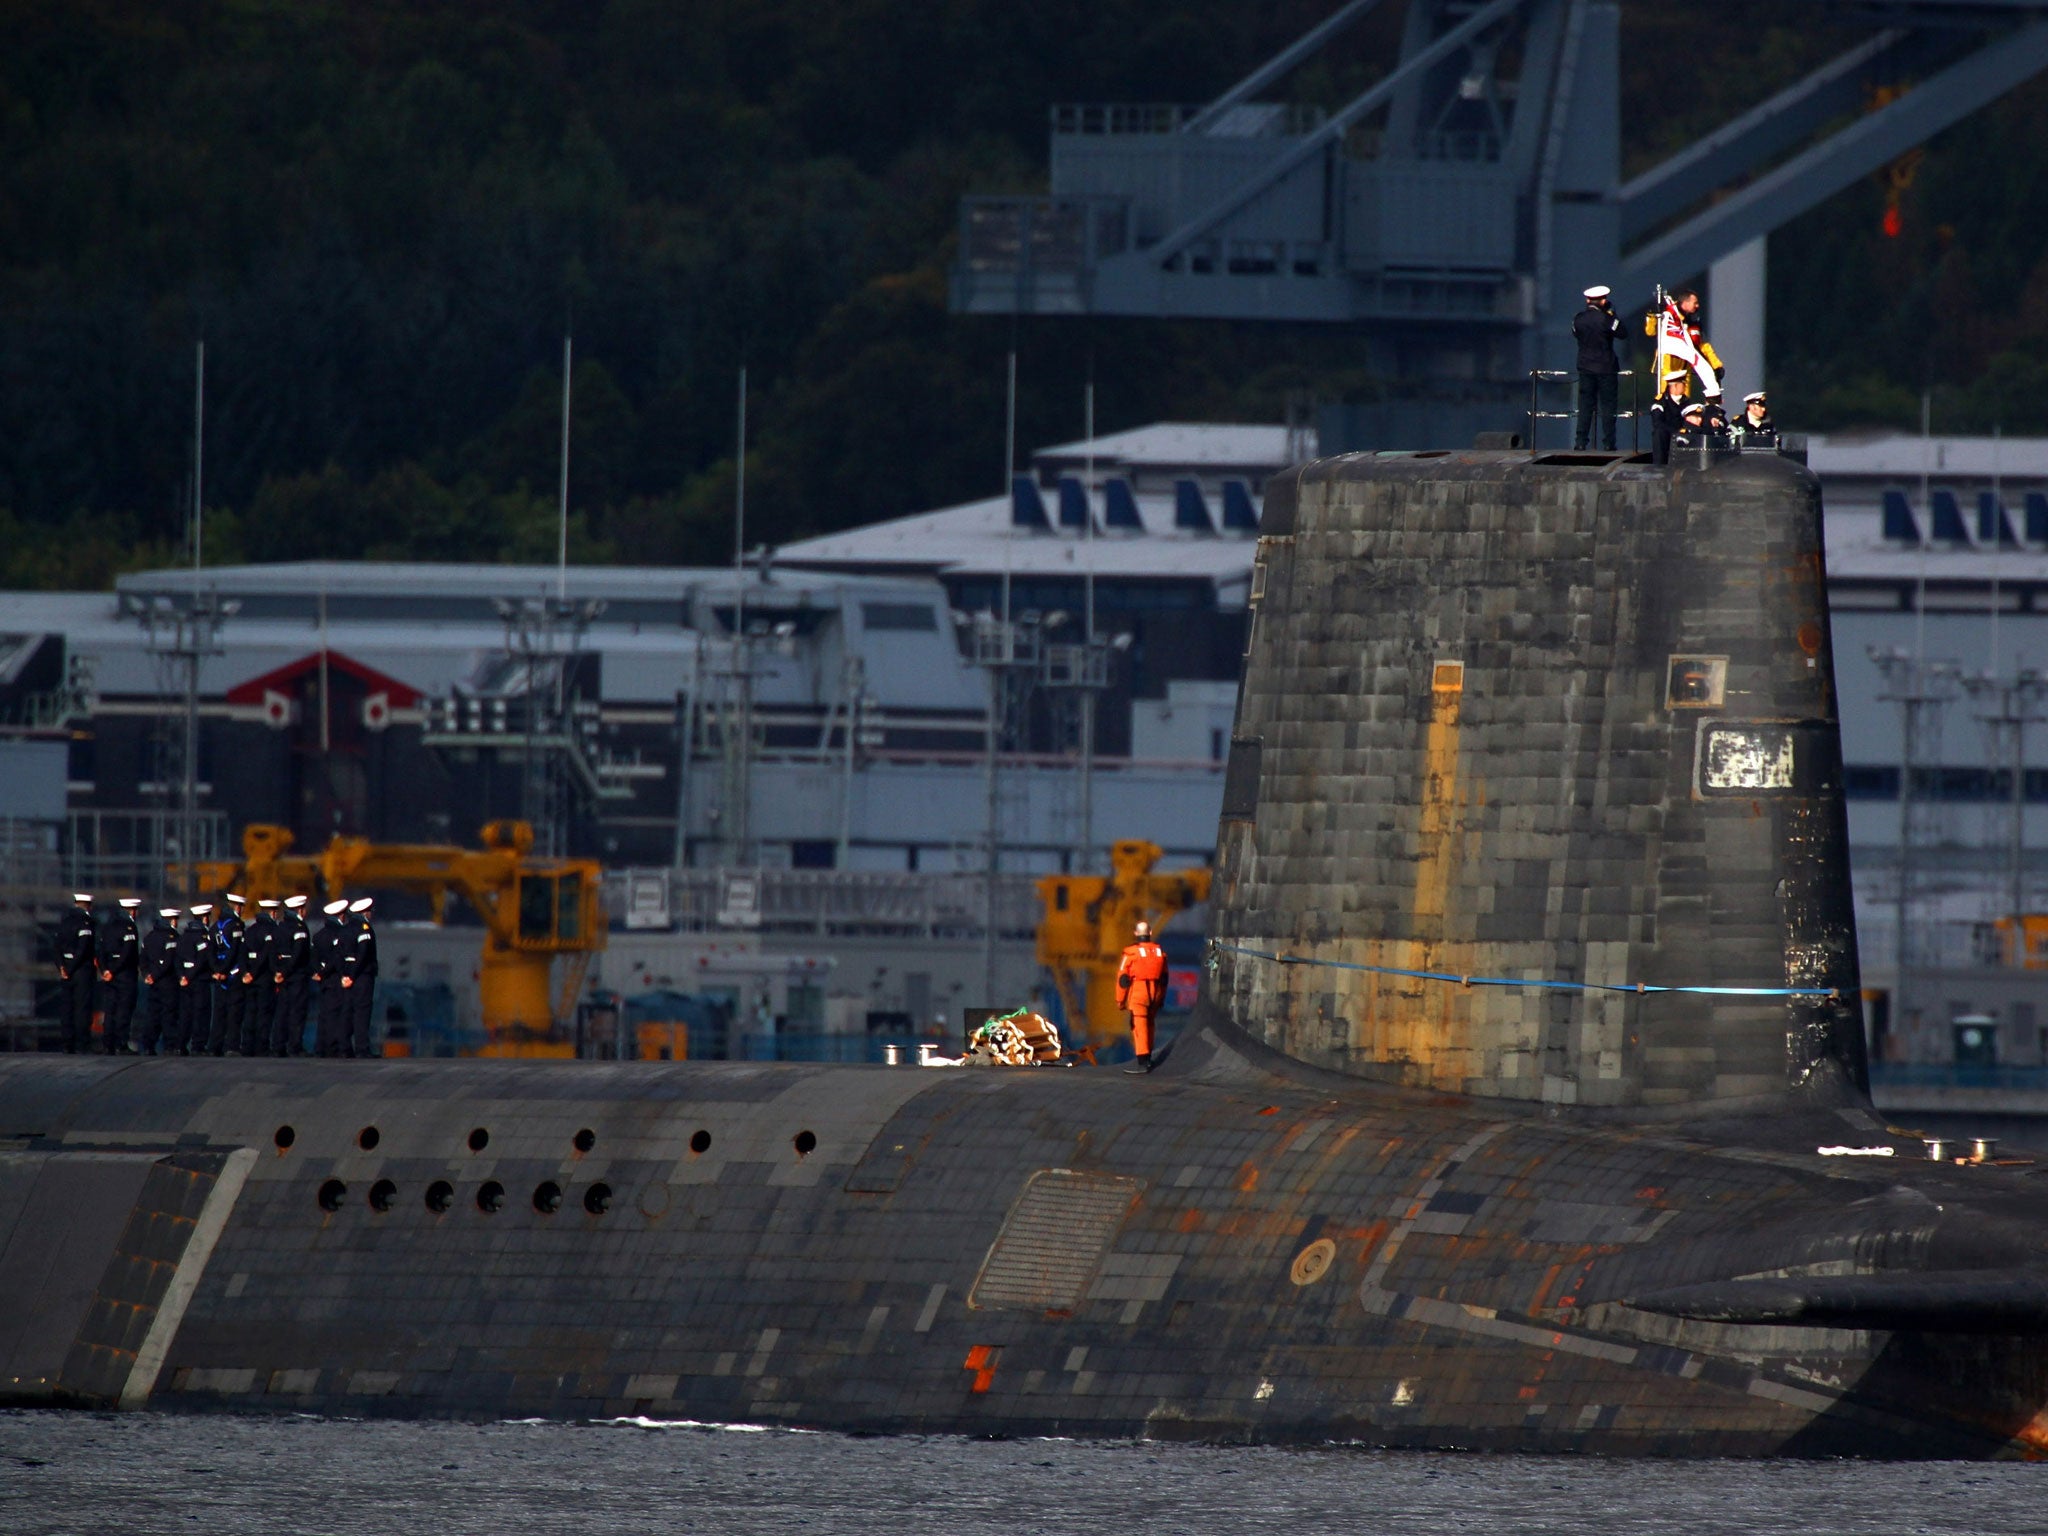 Trident is based on the Clyde